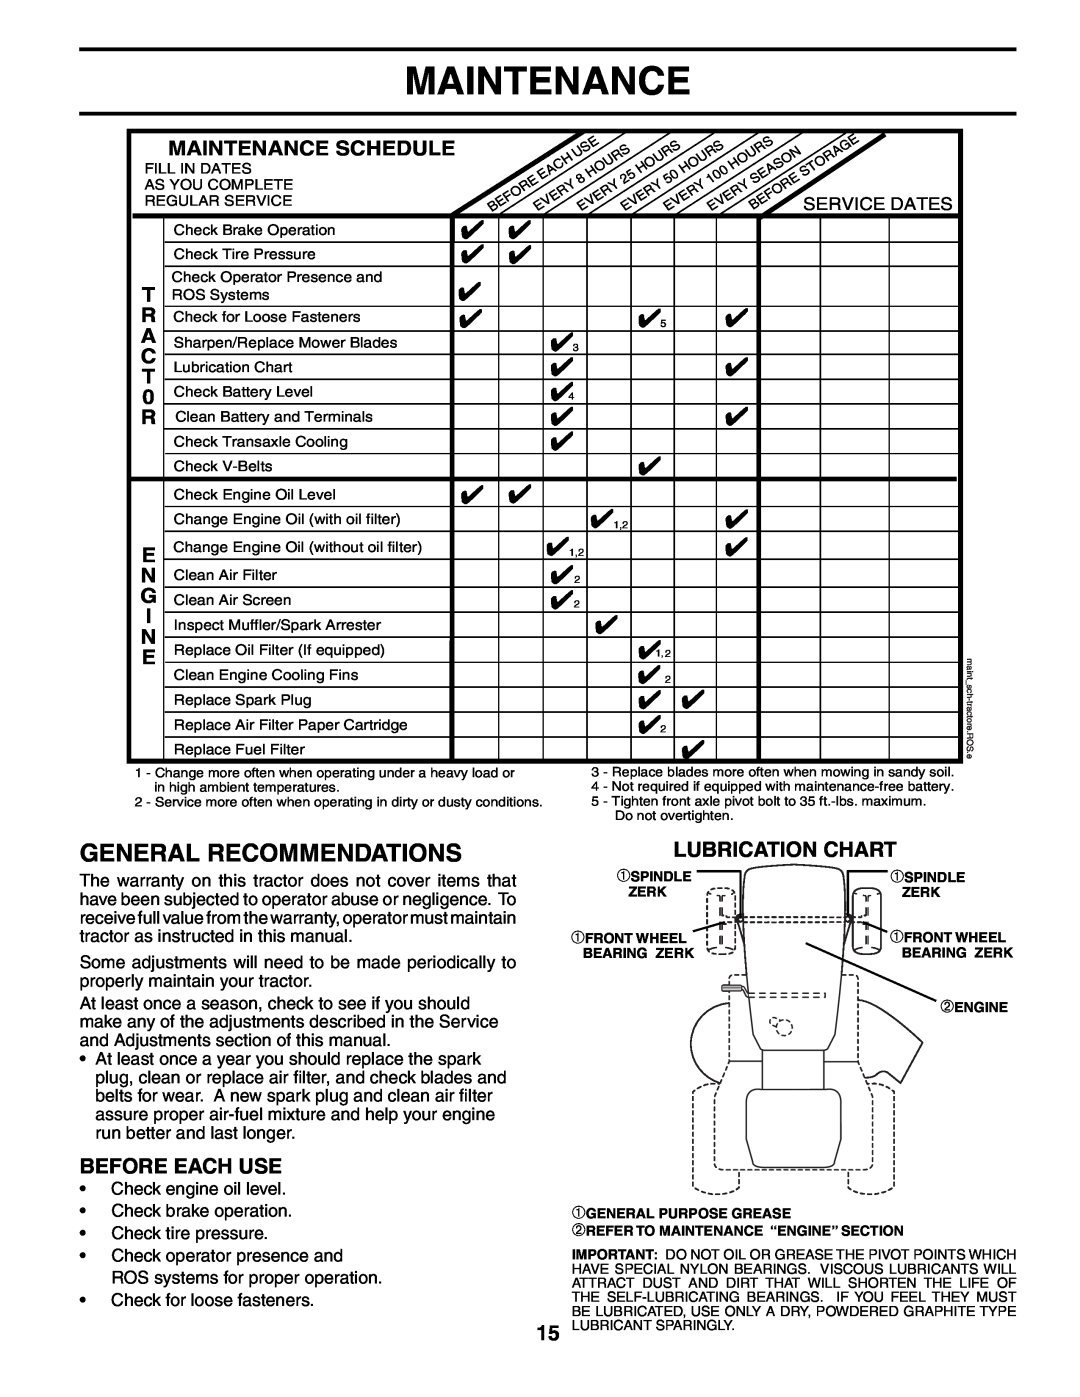 Poulan 194563 manual General Recommendations, Lubrication Chart, Before Each Use, Maintenance Schedule 